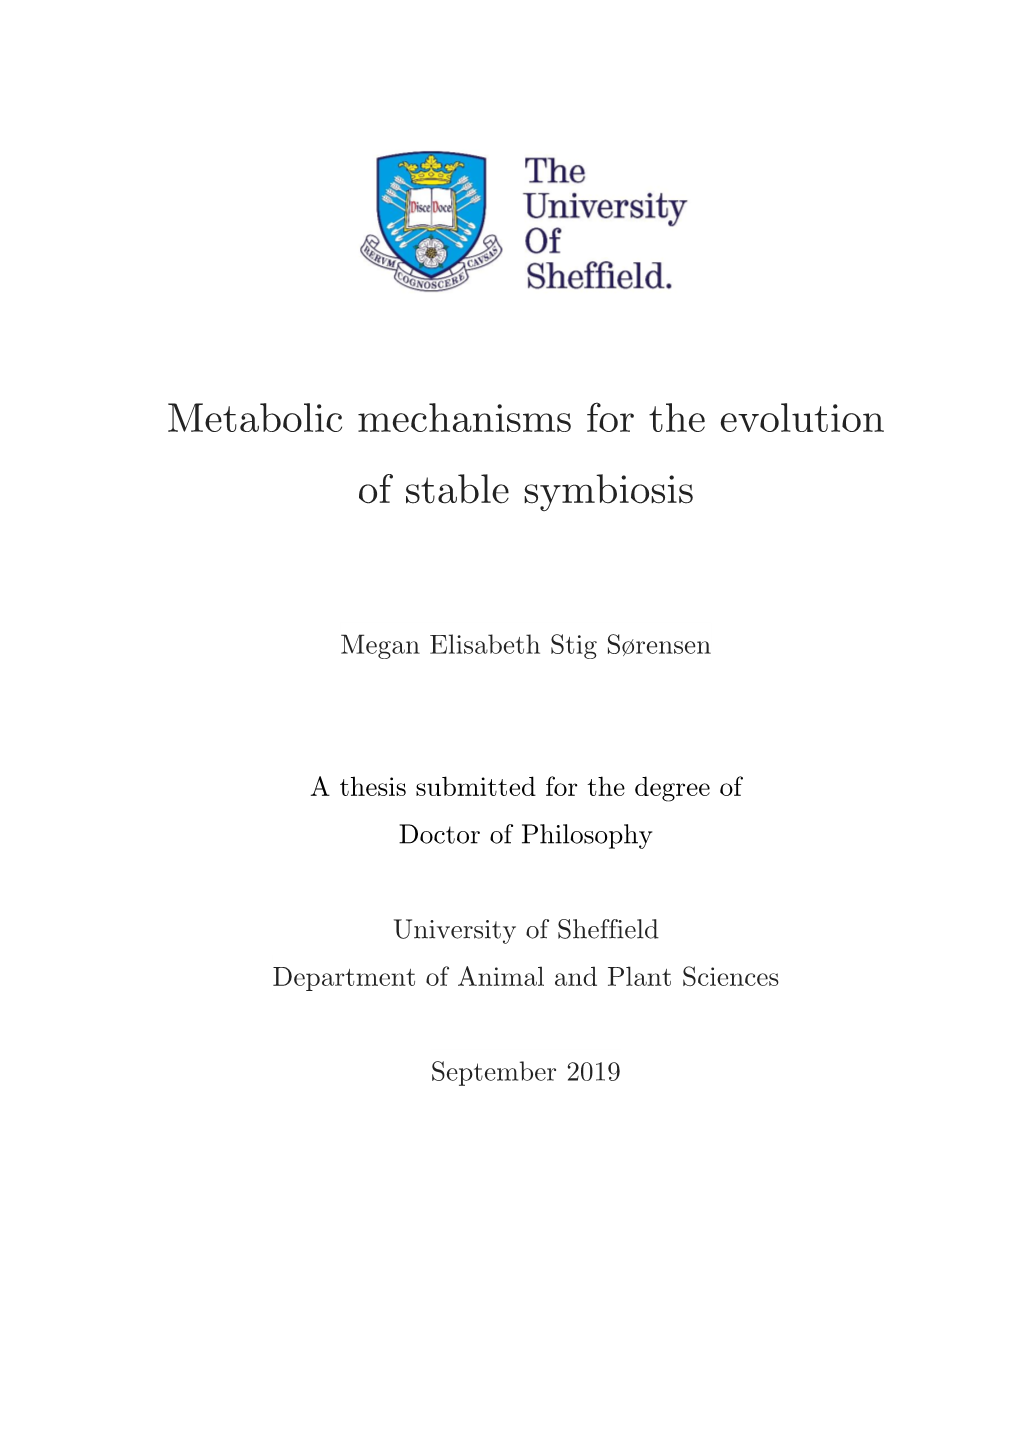 Metabolic Mechanisms for the Evolution of Stable Symbiosis